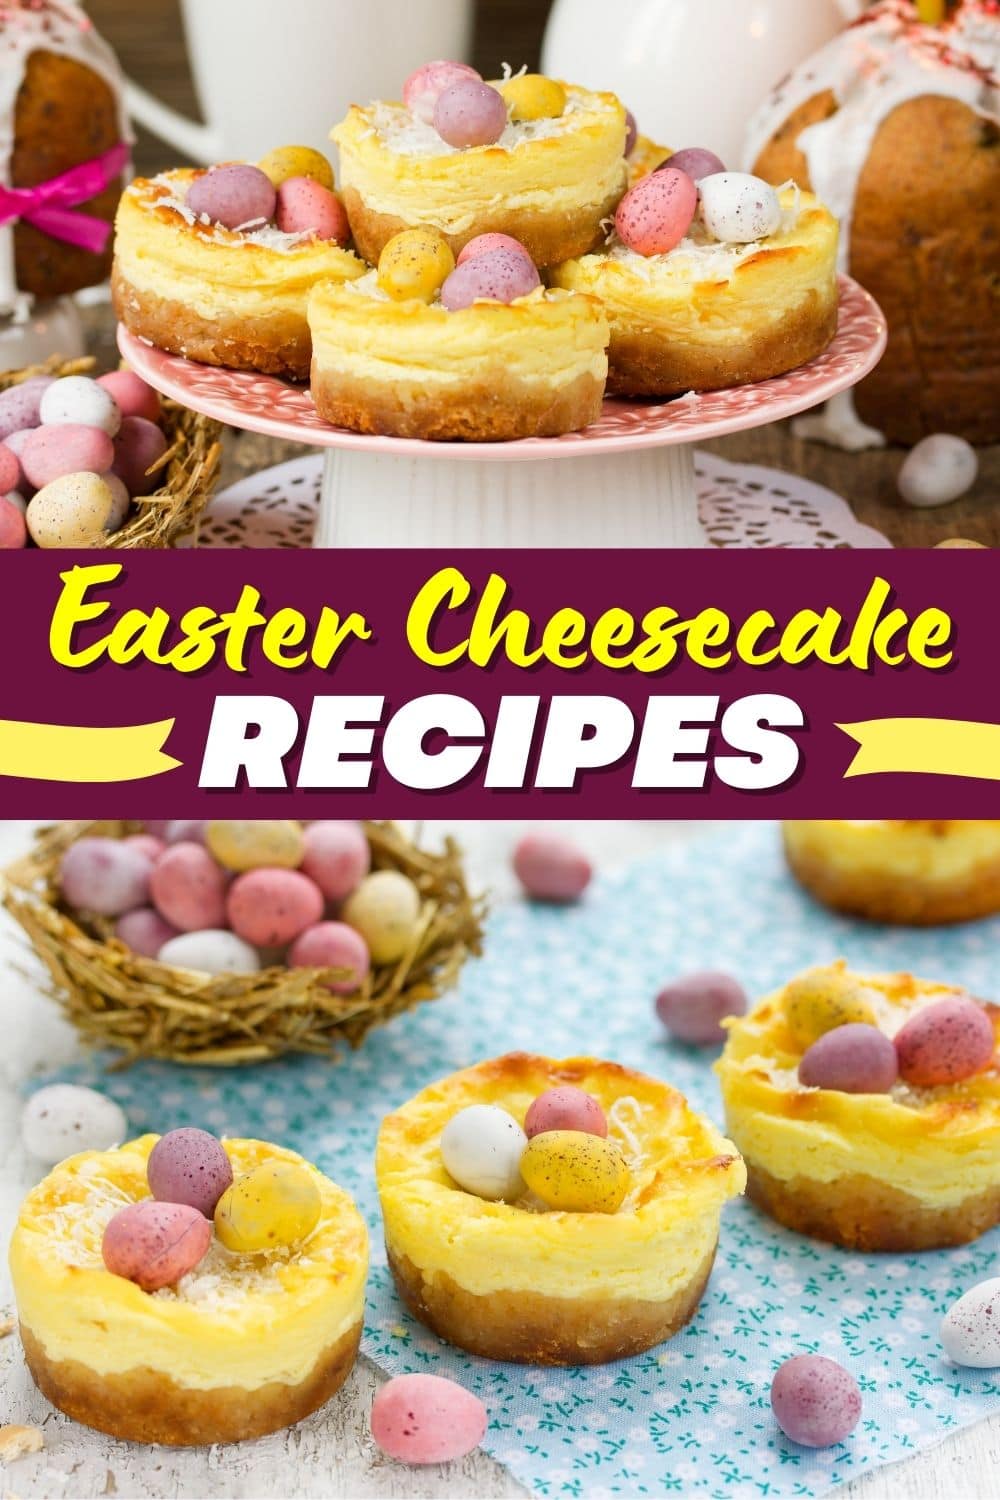 25 Eggcellent Easter Cheesecake Recipes - Insanely Good